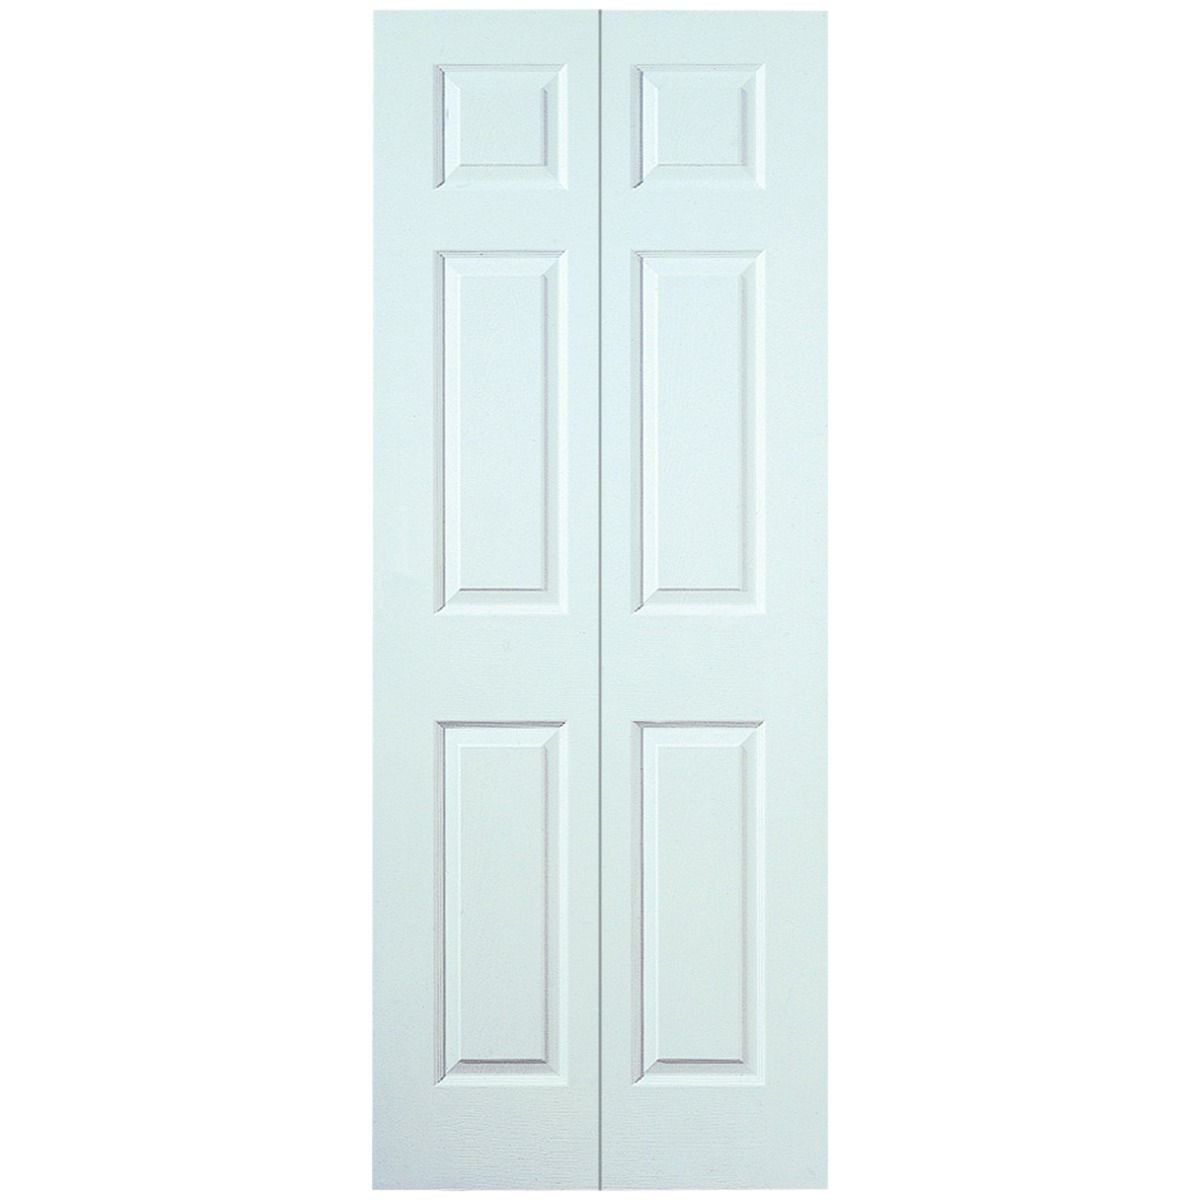 Image of Wickes Lincoln White Smooth Moulded 6 Panel Internal Bi-Fold Door - 1981 x 762mm